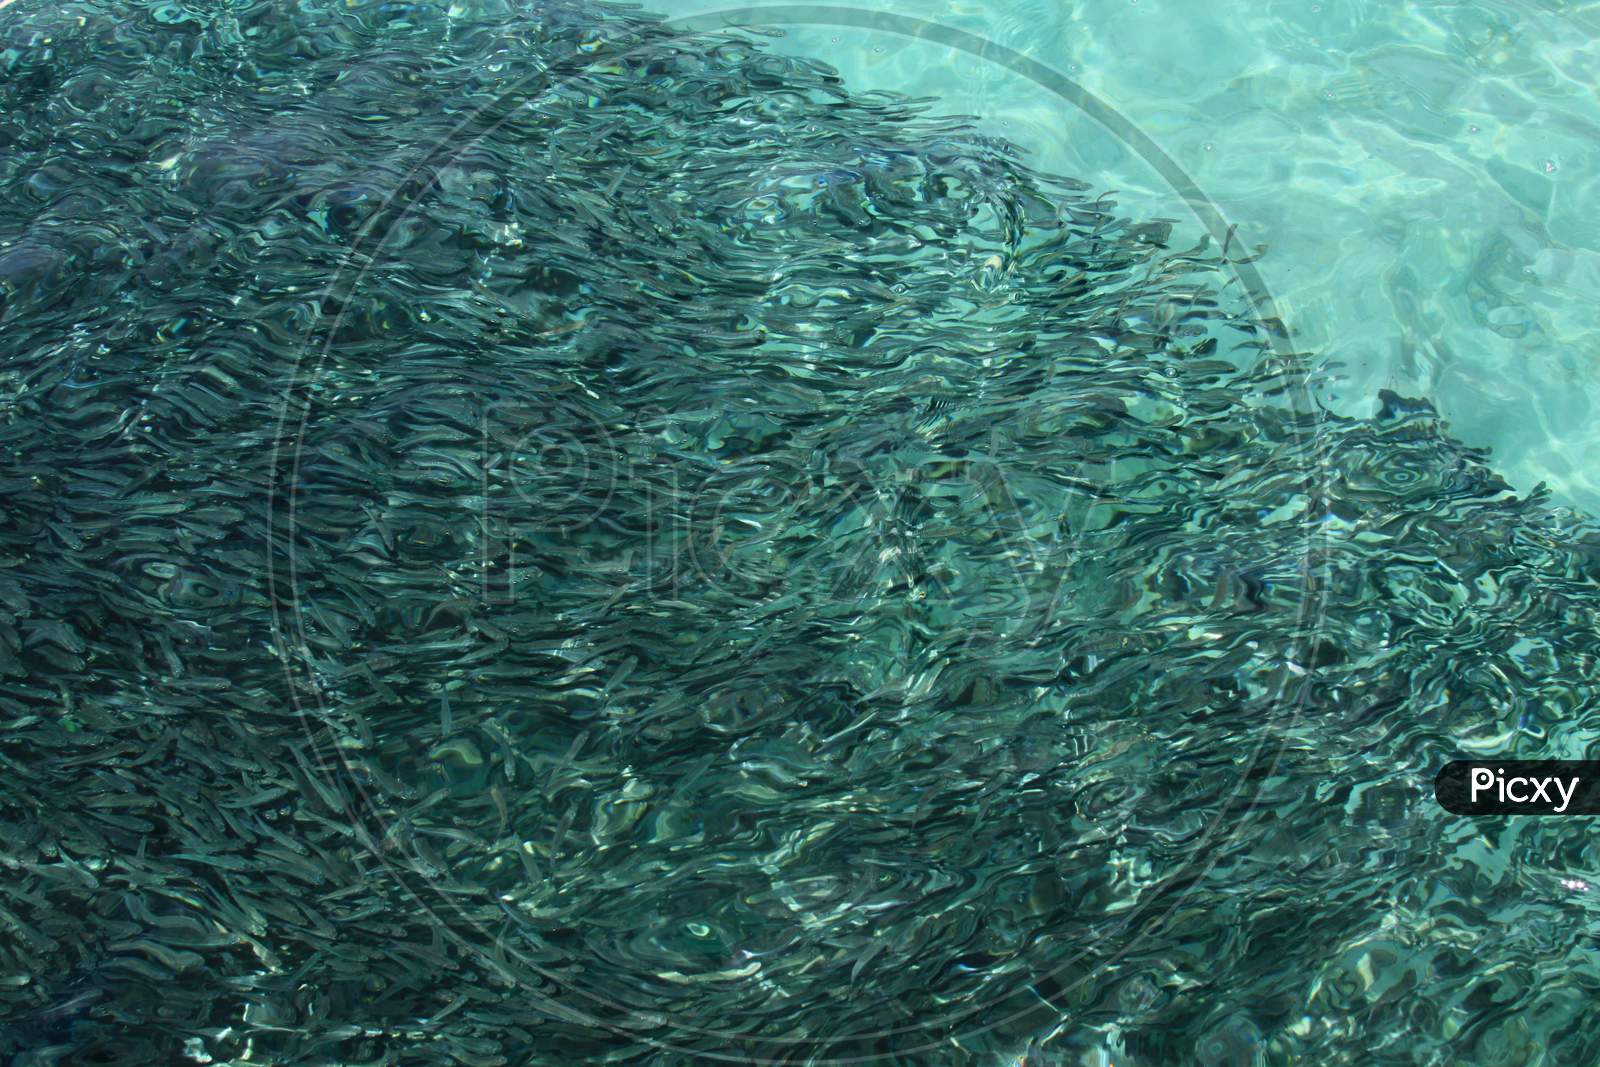 School Of Fish Crowding The Water Close To Surface